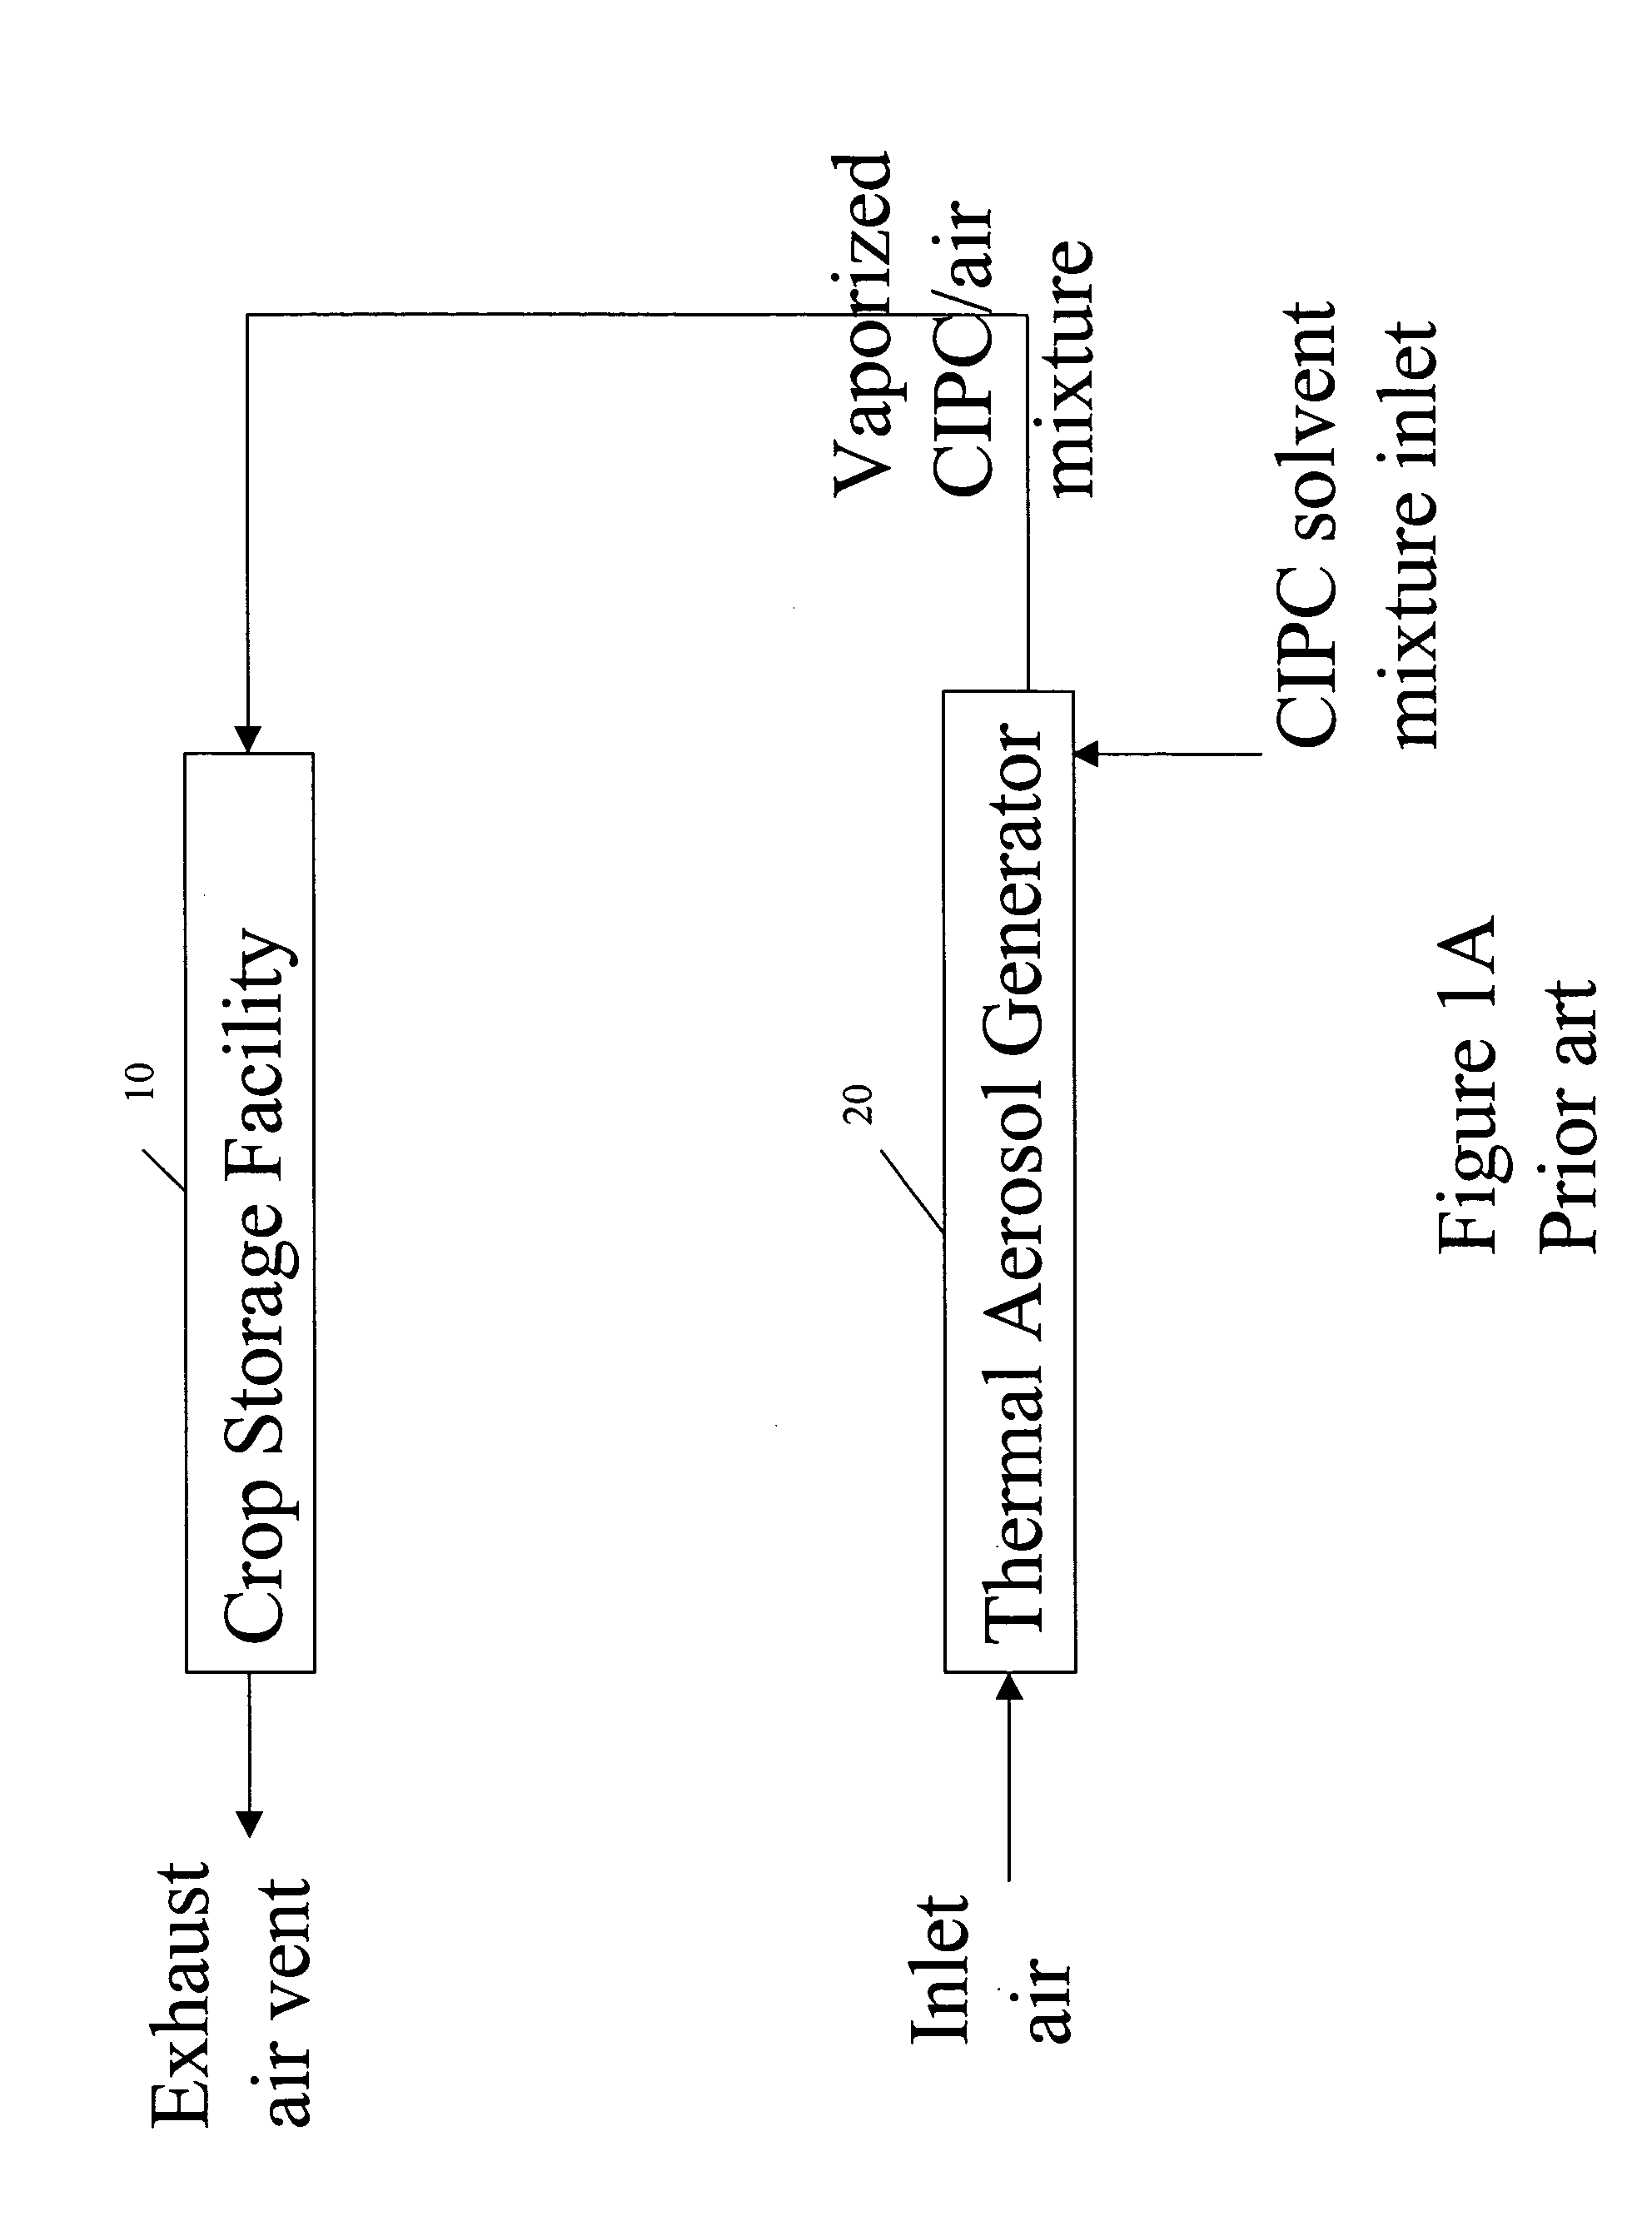 Method and apparatus for treating stored crops